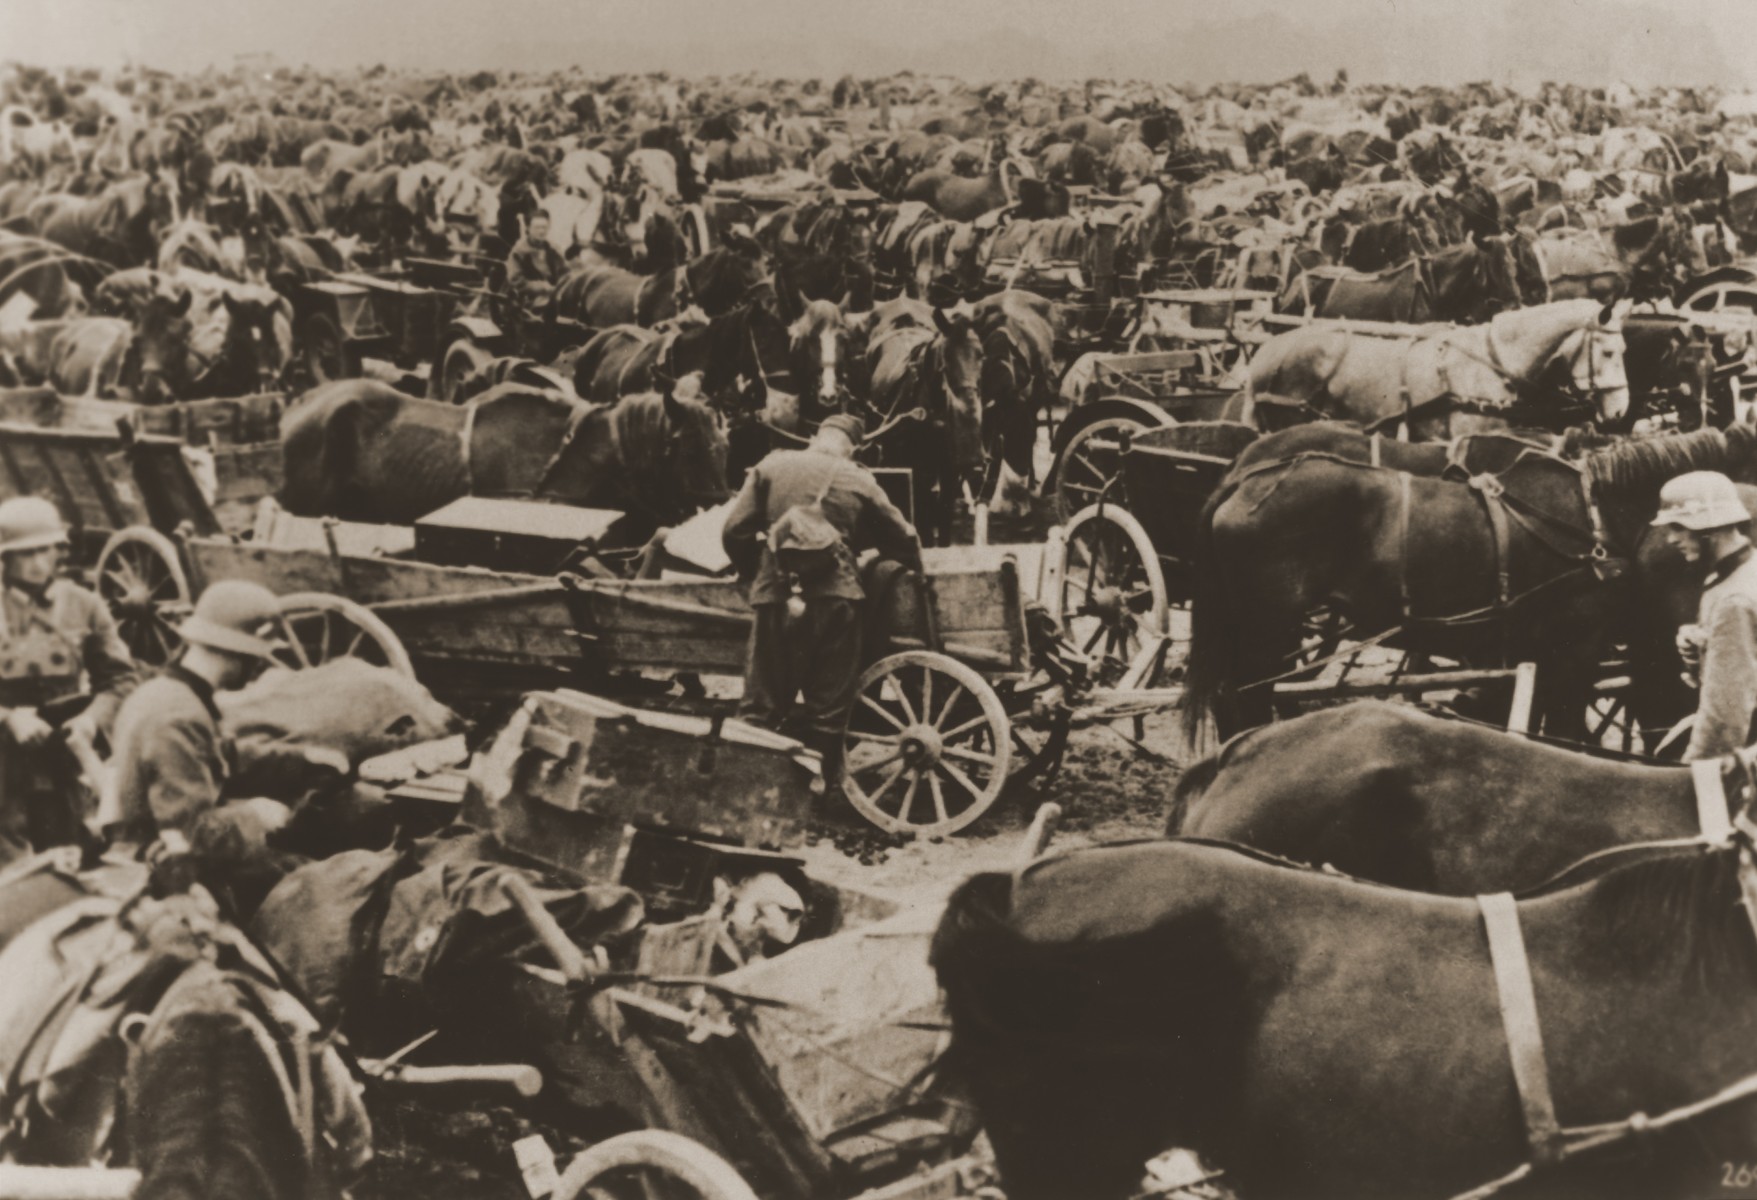 German soldiers stand among a vast assembly of horse-drawn wagons during the invasion of Poland.